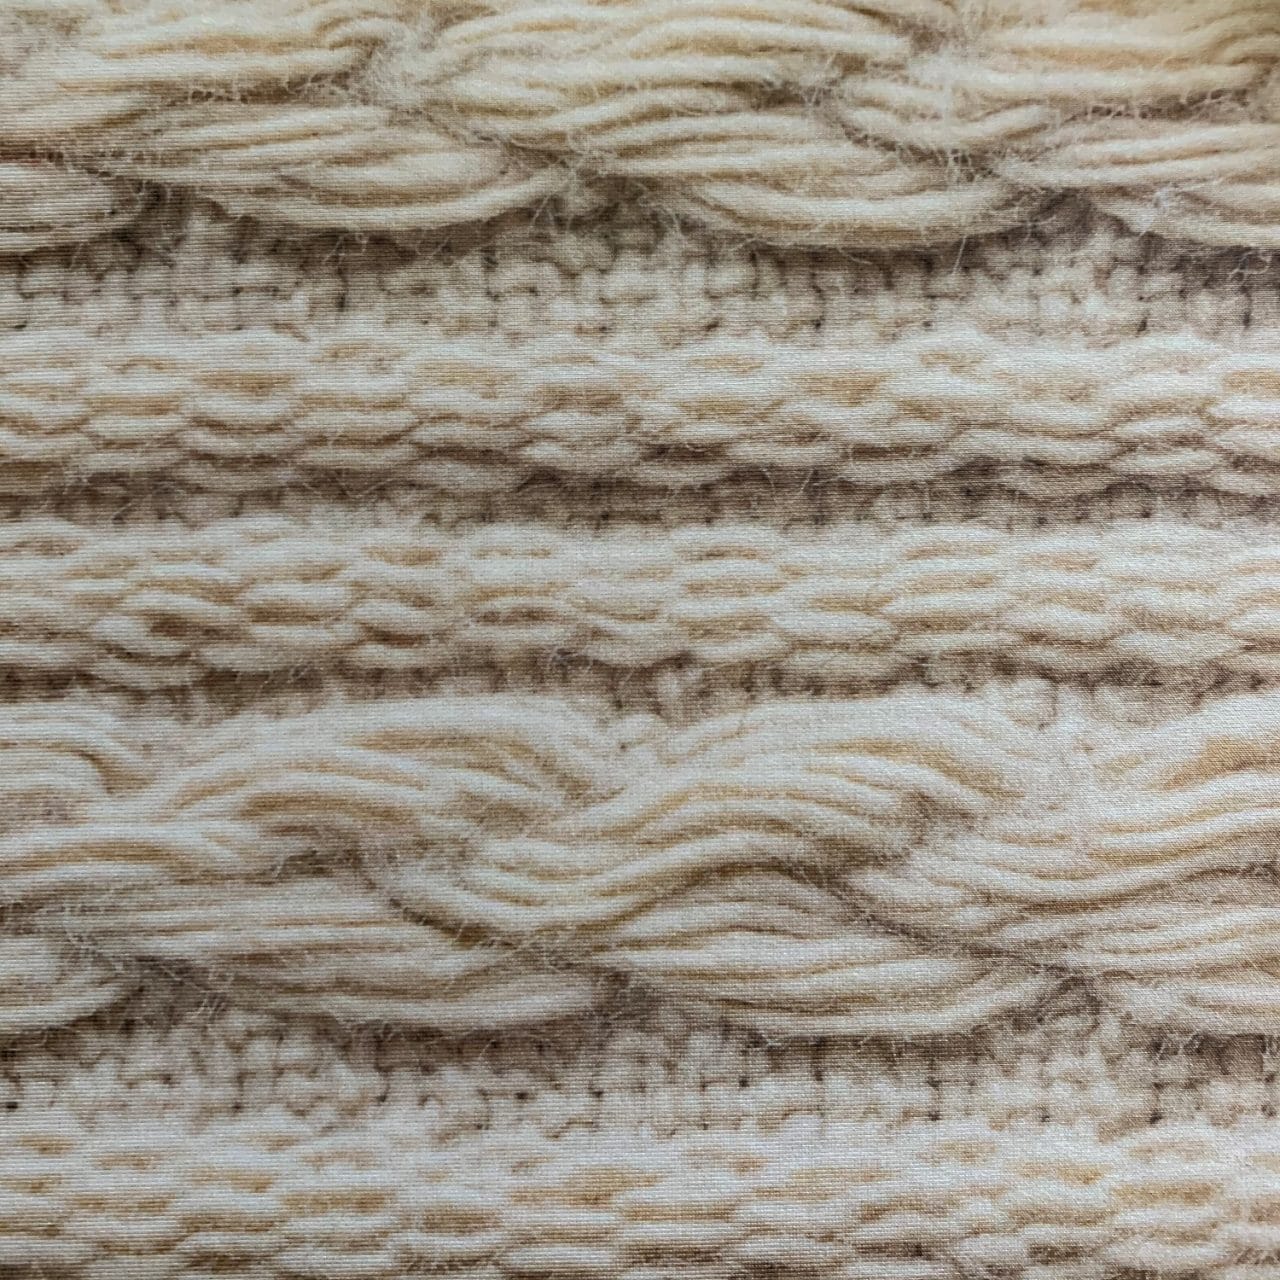 Cable Knit Fabric  Knit Fabric with Rows & 4-Way Stretch